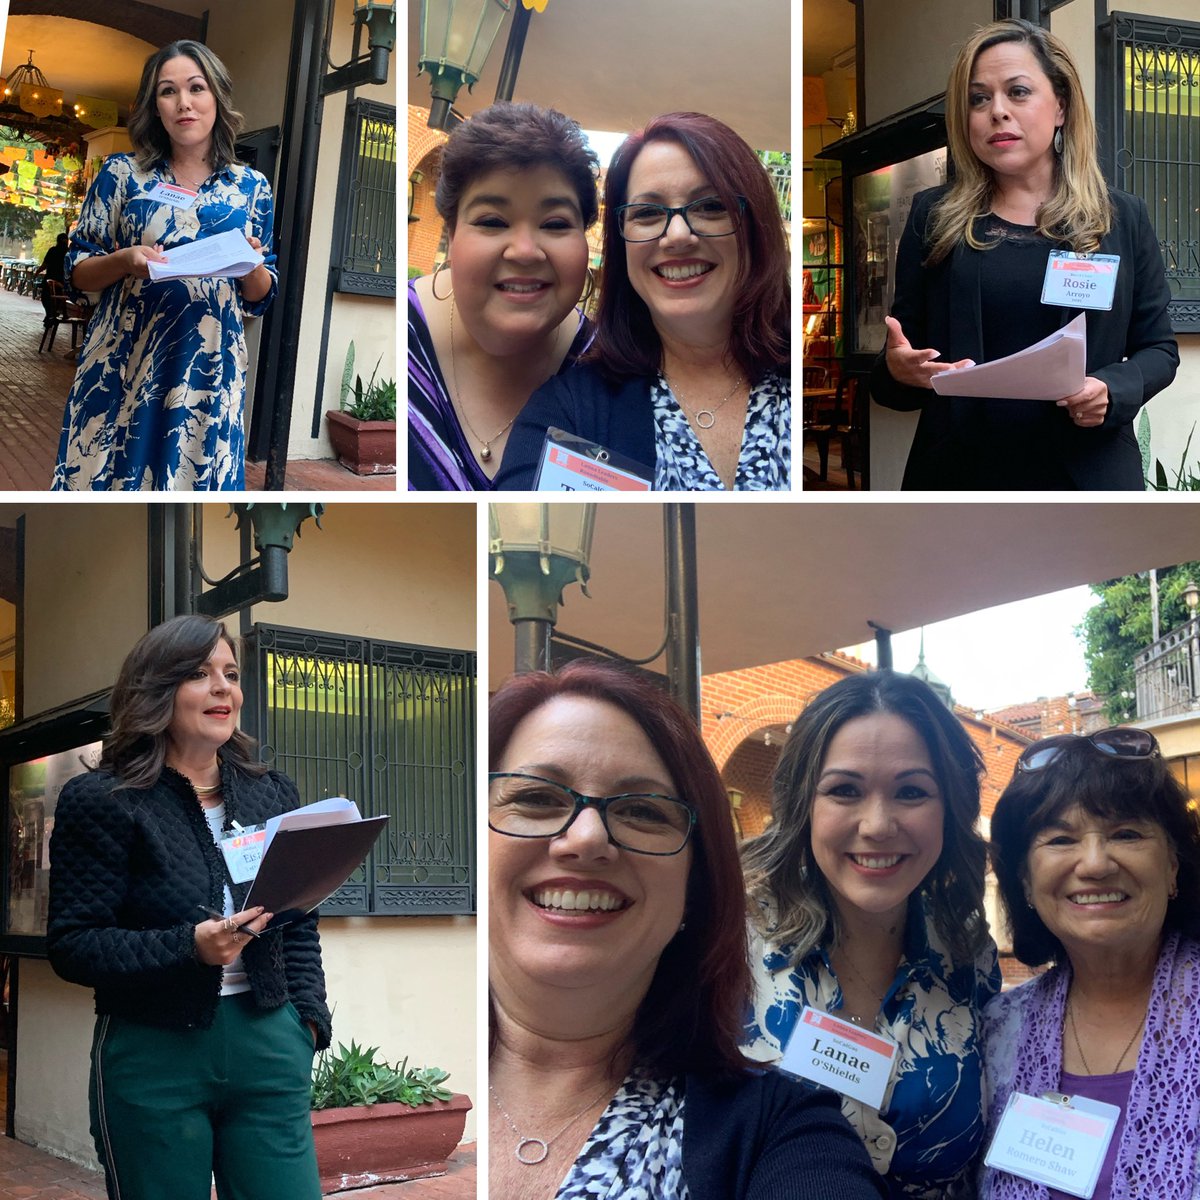 Loved spending the evening with some fabulous @HOPELatinas & Latina Leaders at @ElPortalPas tonight. @socalgas VP Elsa Valay-Paz shared our #ASPIRE2045 plan, & Maya Gomez O’Cadiz shared “Leading with HOPE” research. Thanks to @Lanae_OShields for your commitment to HOPE! 💙